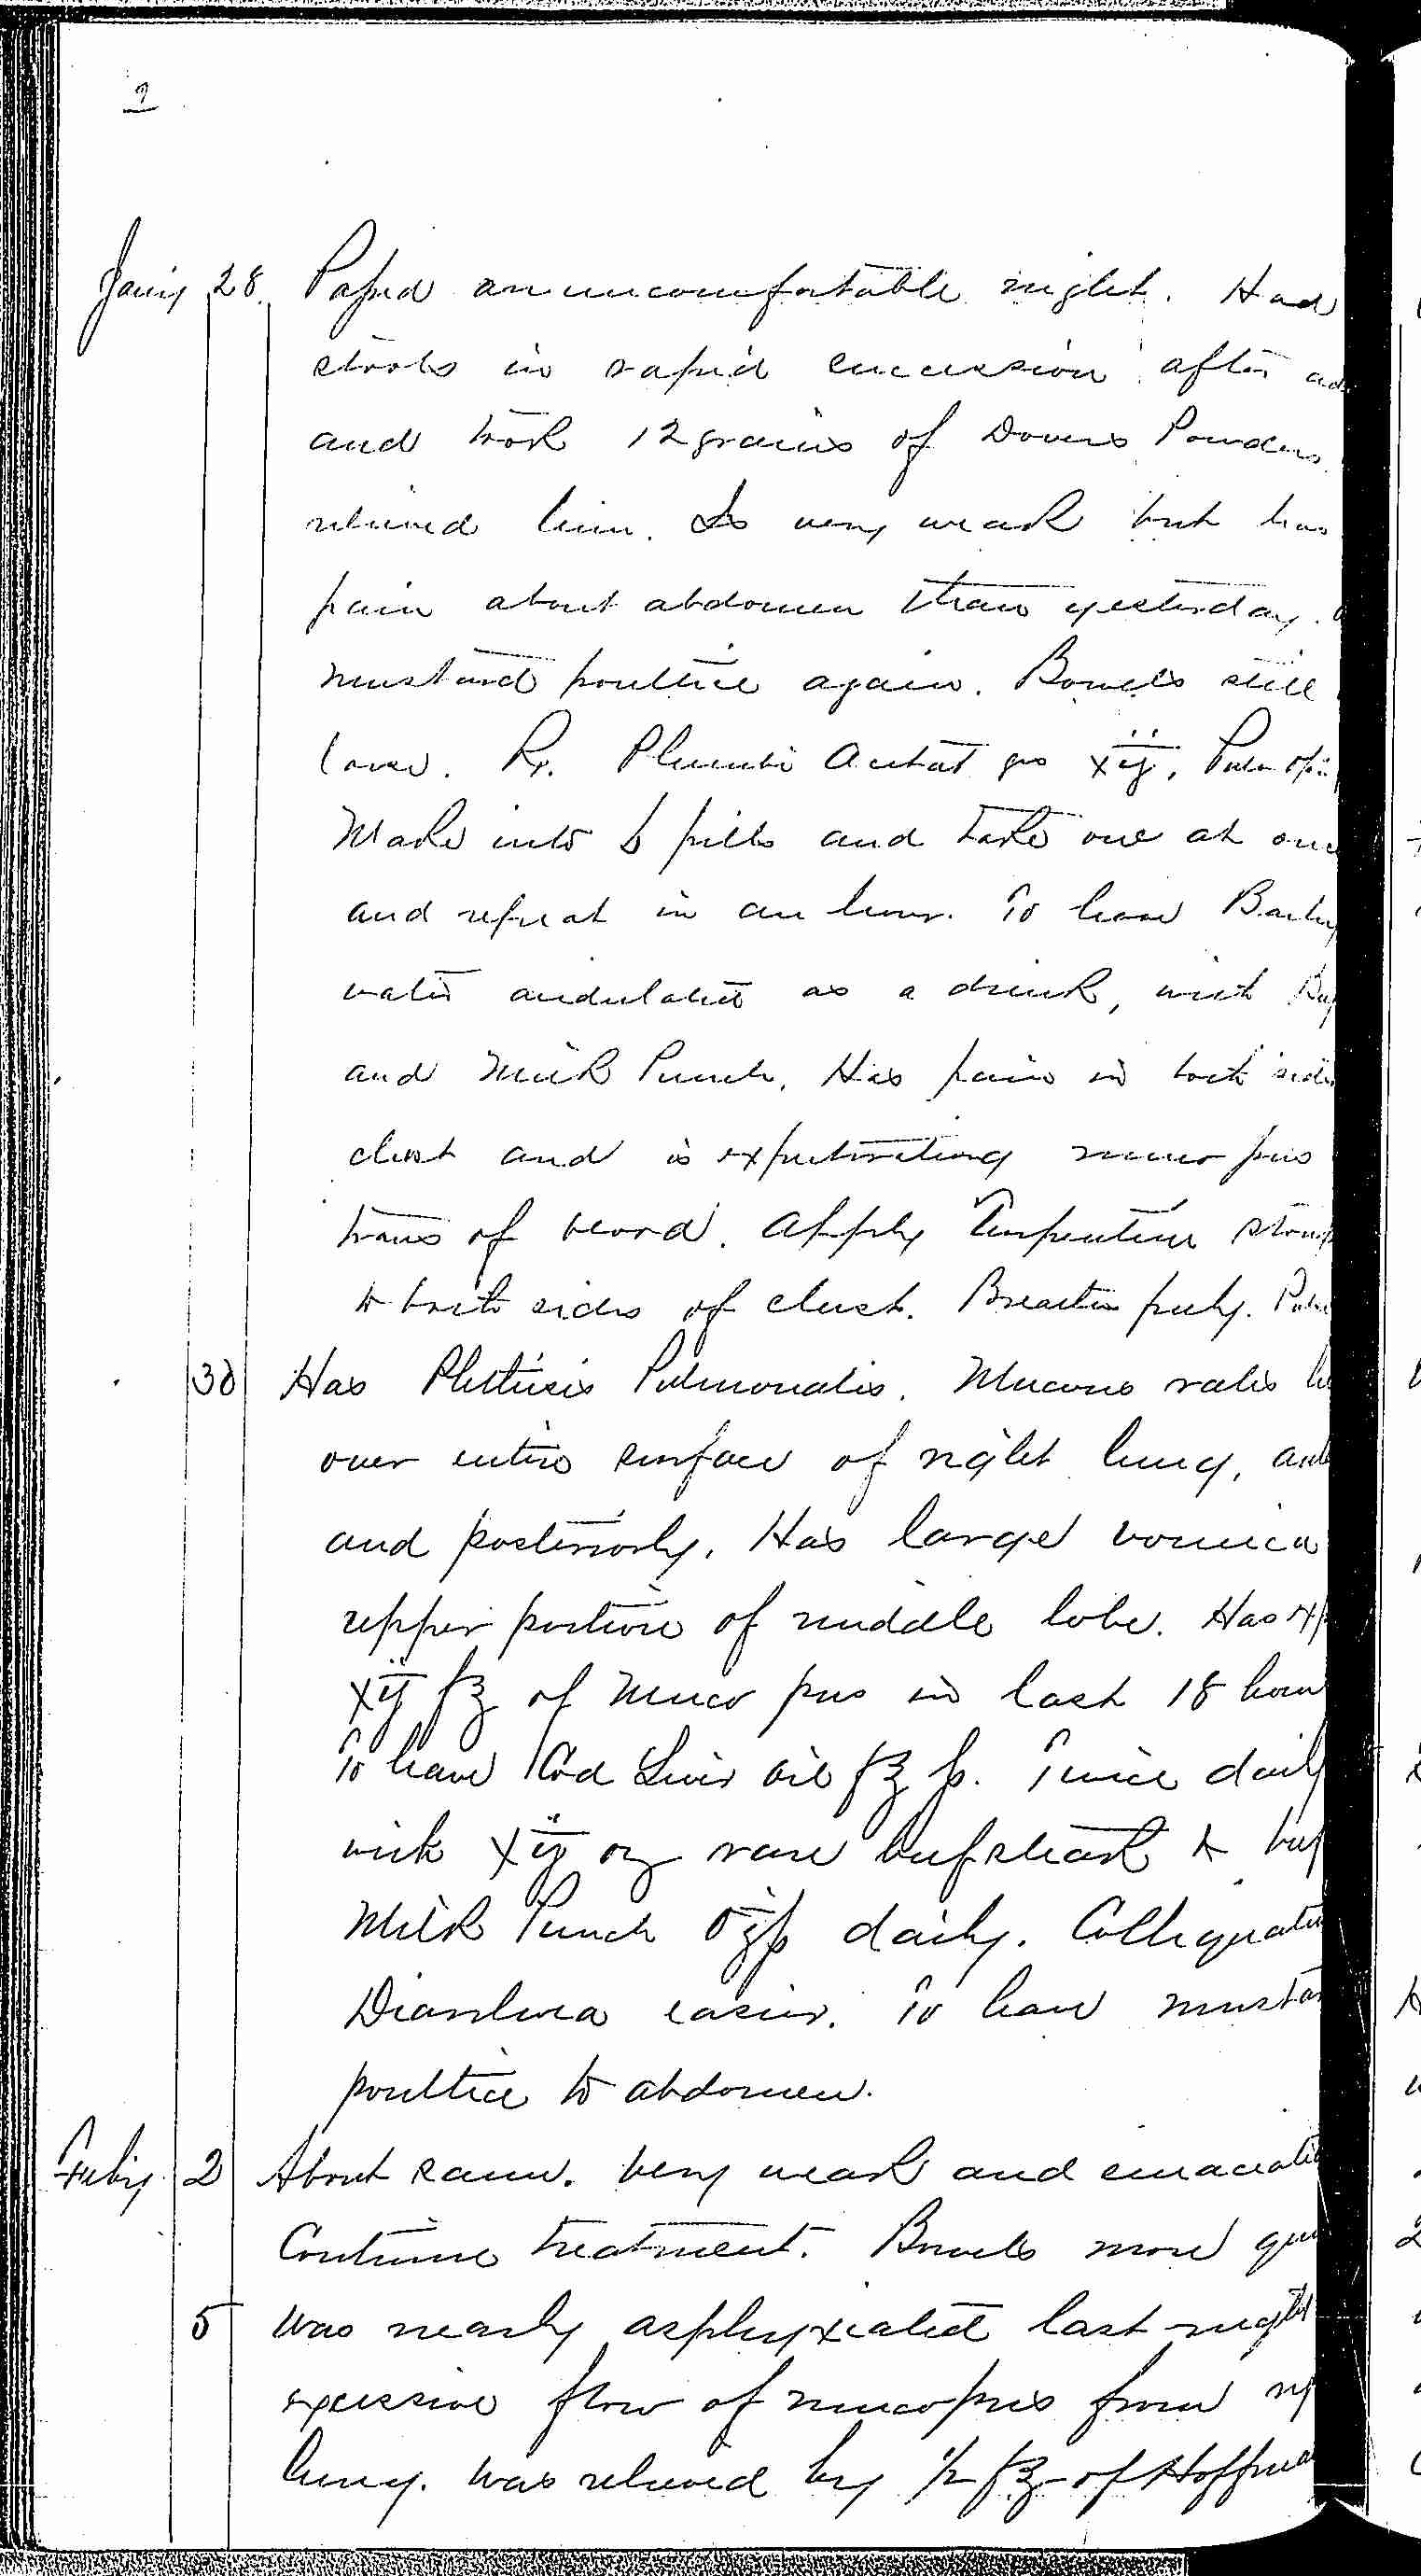 Entry for William Robertson (page 2 of 5) in the log Hospital Tickets and Case Papers - Naval Hospital - Washington, D.C. - 1868-69